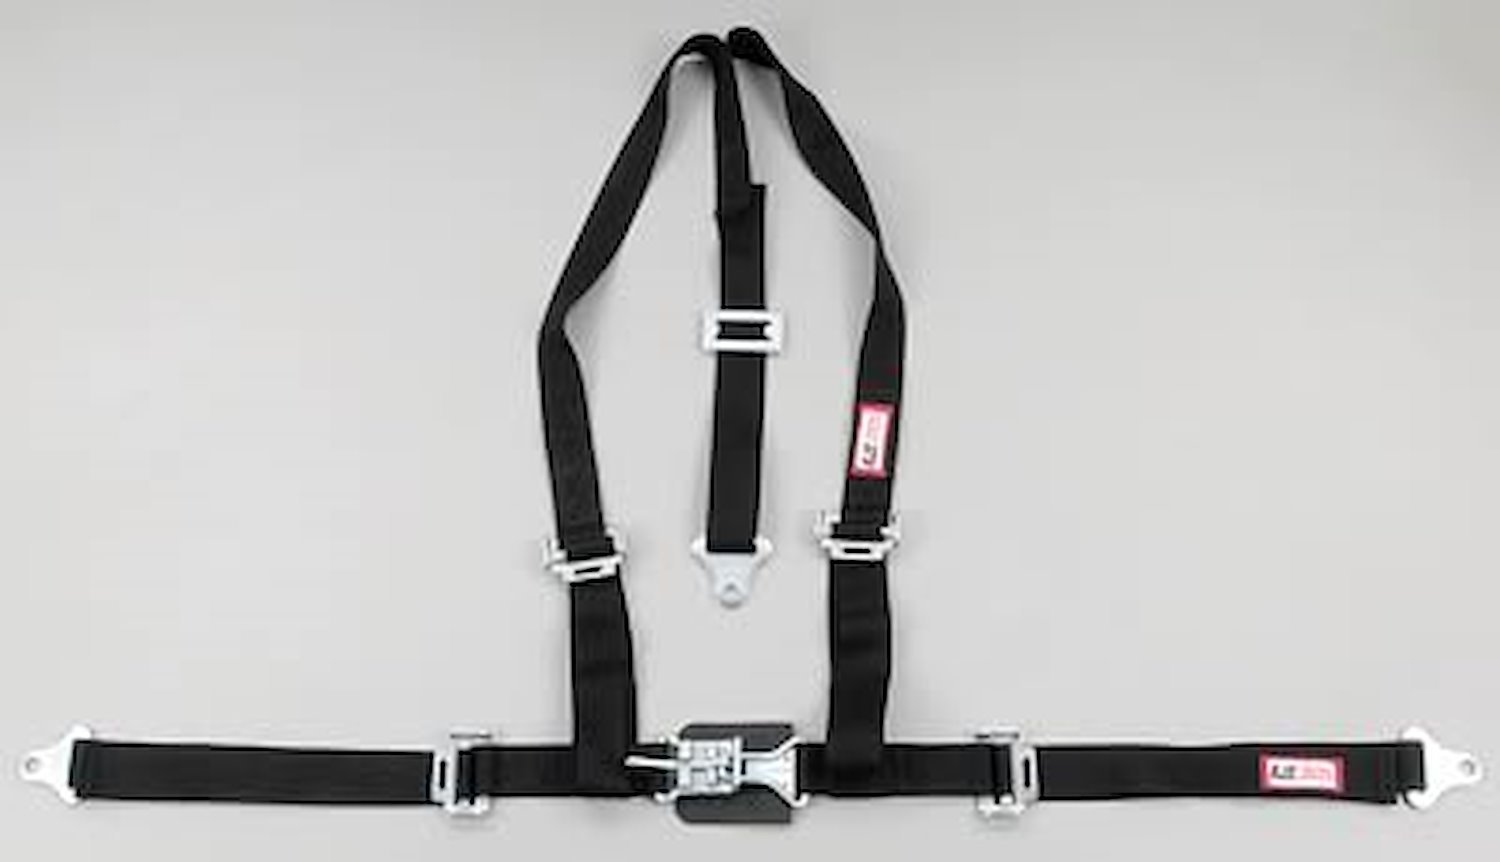 NON-SFI L&L HARNESS 3 PULL UP Lap BELT SEWN IN 2 S.H. Y FLOOR Mount w/STERNUM STRAP ALL WRAP ENDS RED